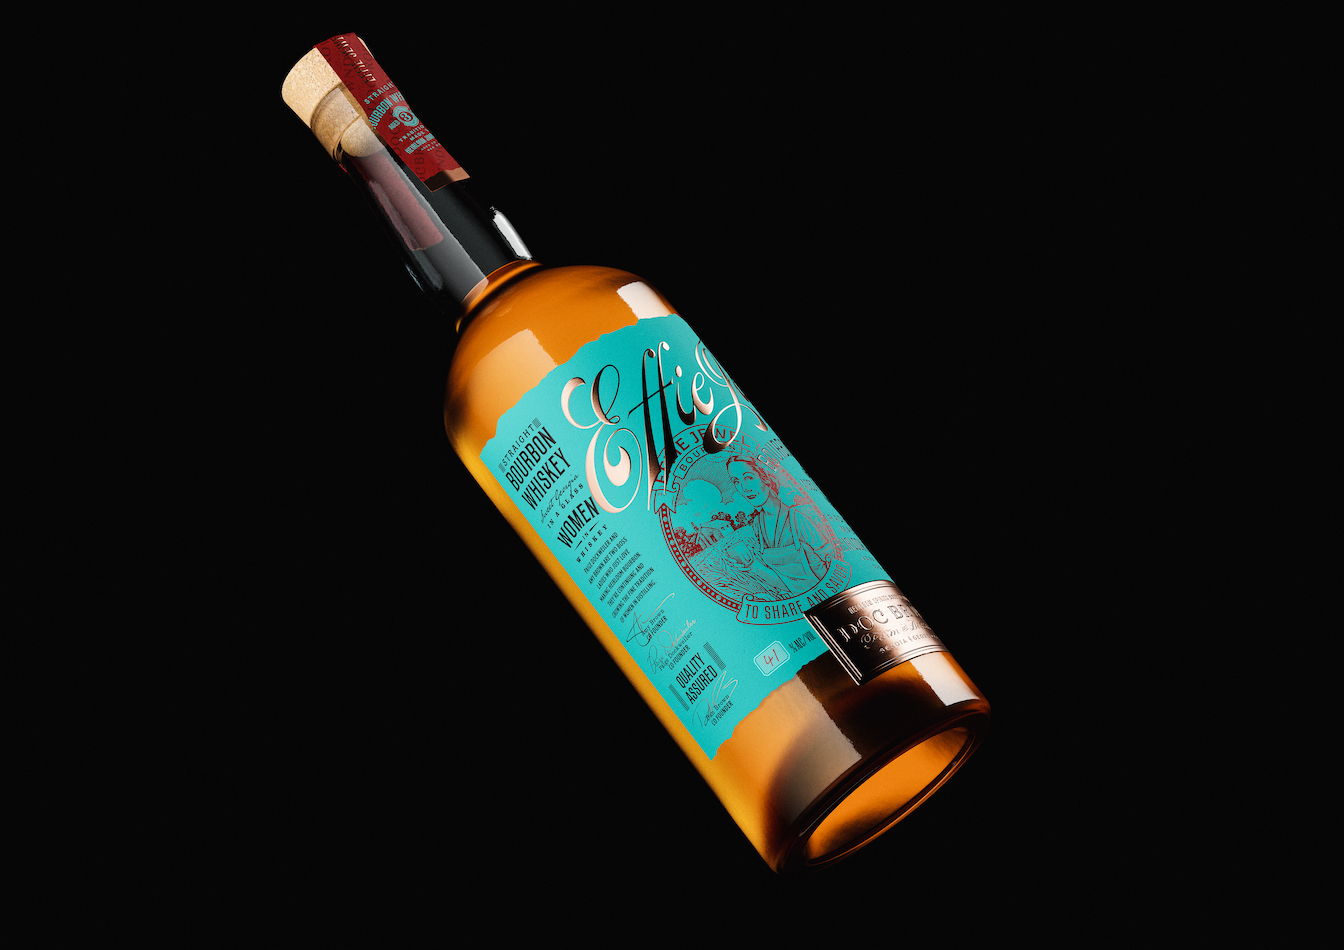 Effie Jewel Straight Bourbon Whiskey from Doc Brown Farm and distillers, bottle image